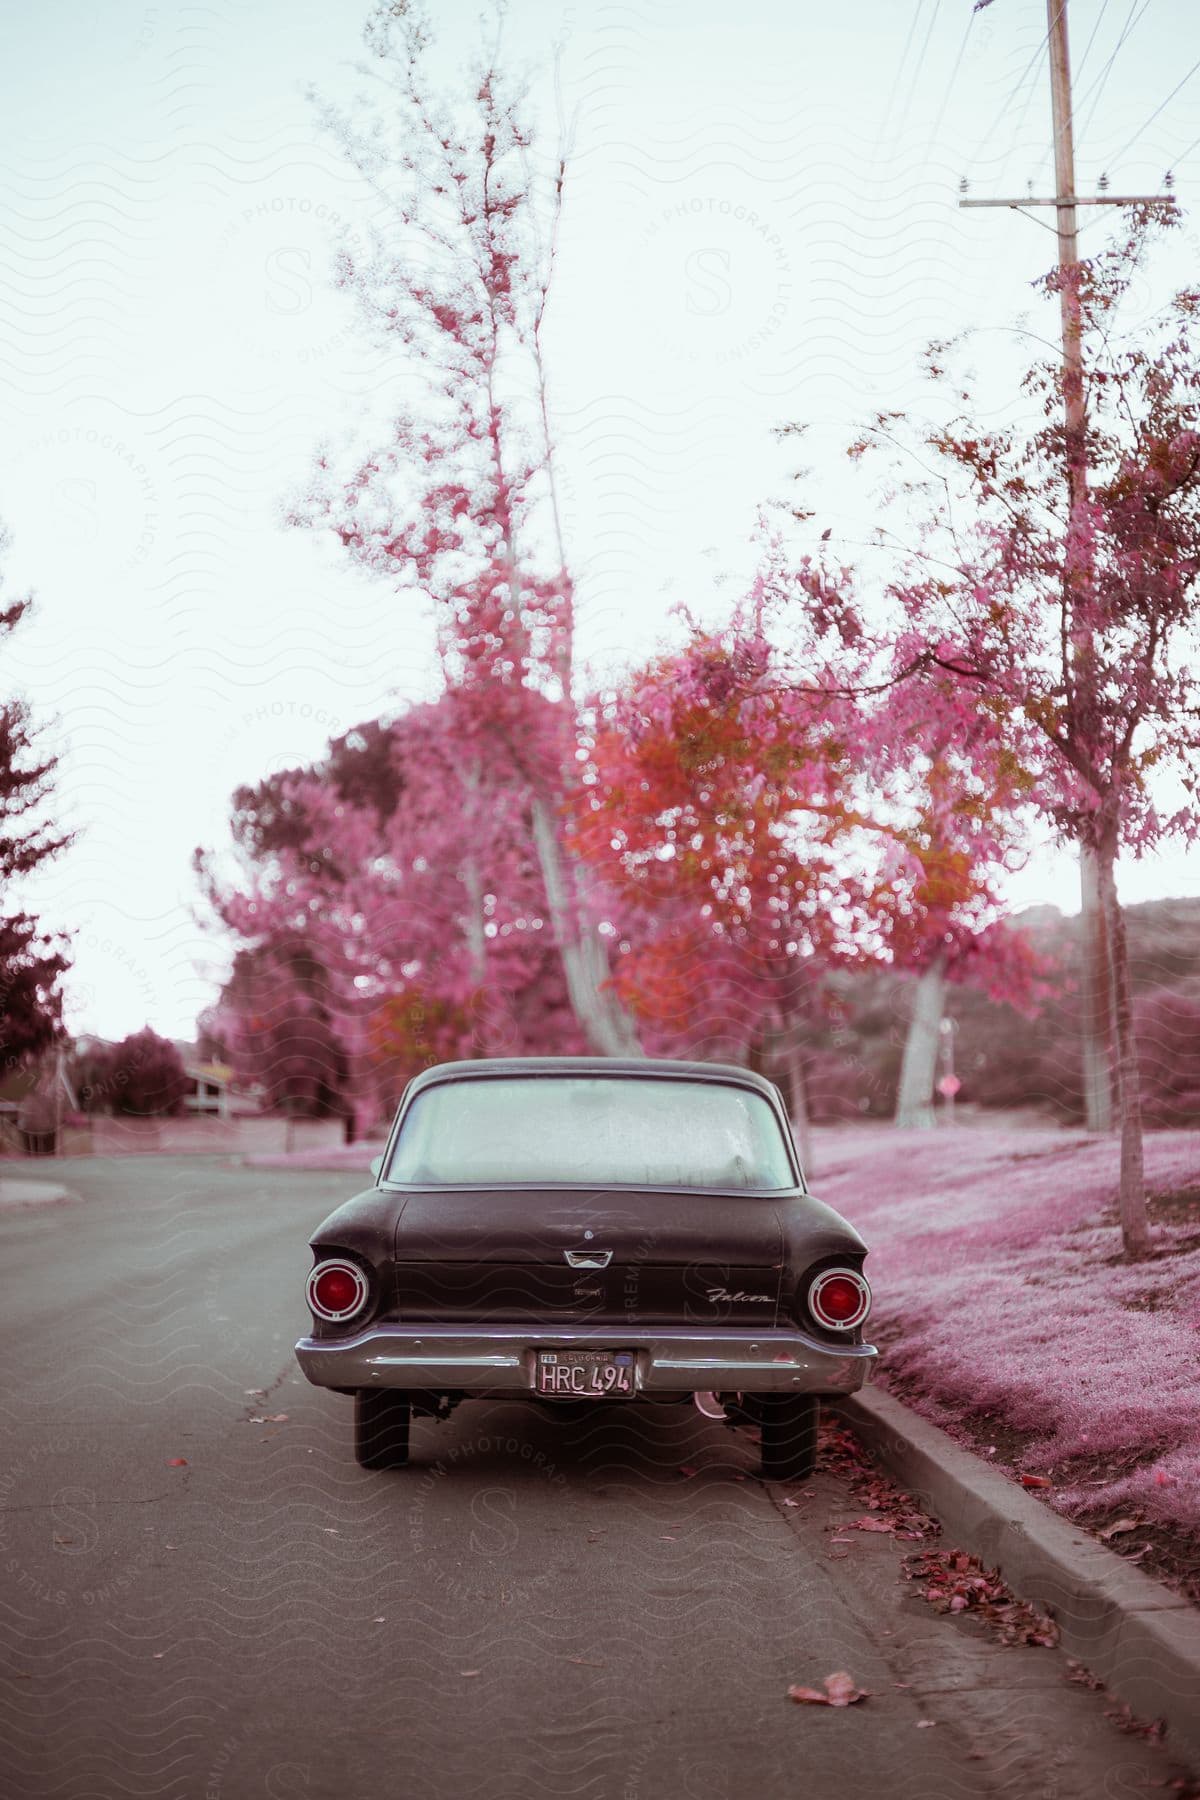 An old car with a foggy back window is parked on the side of the road near trees with pink and red leaves.